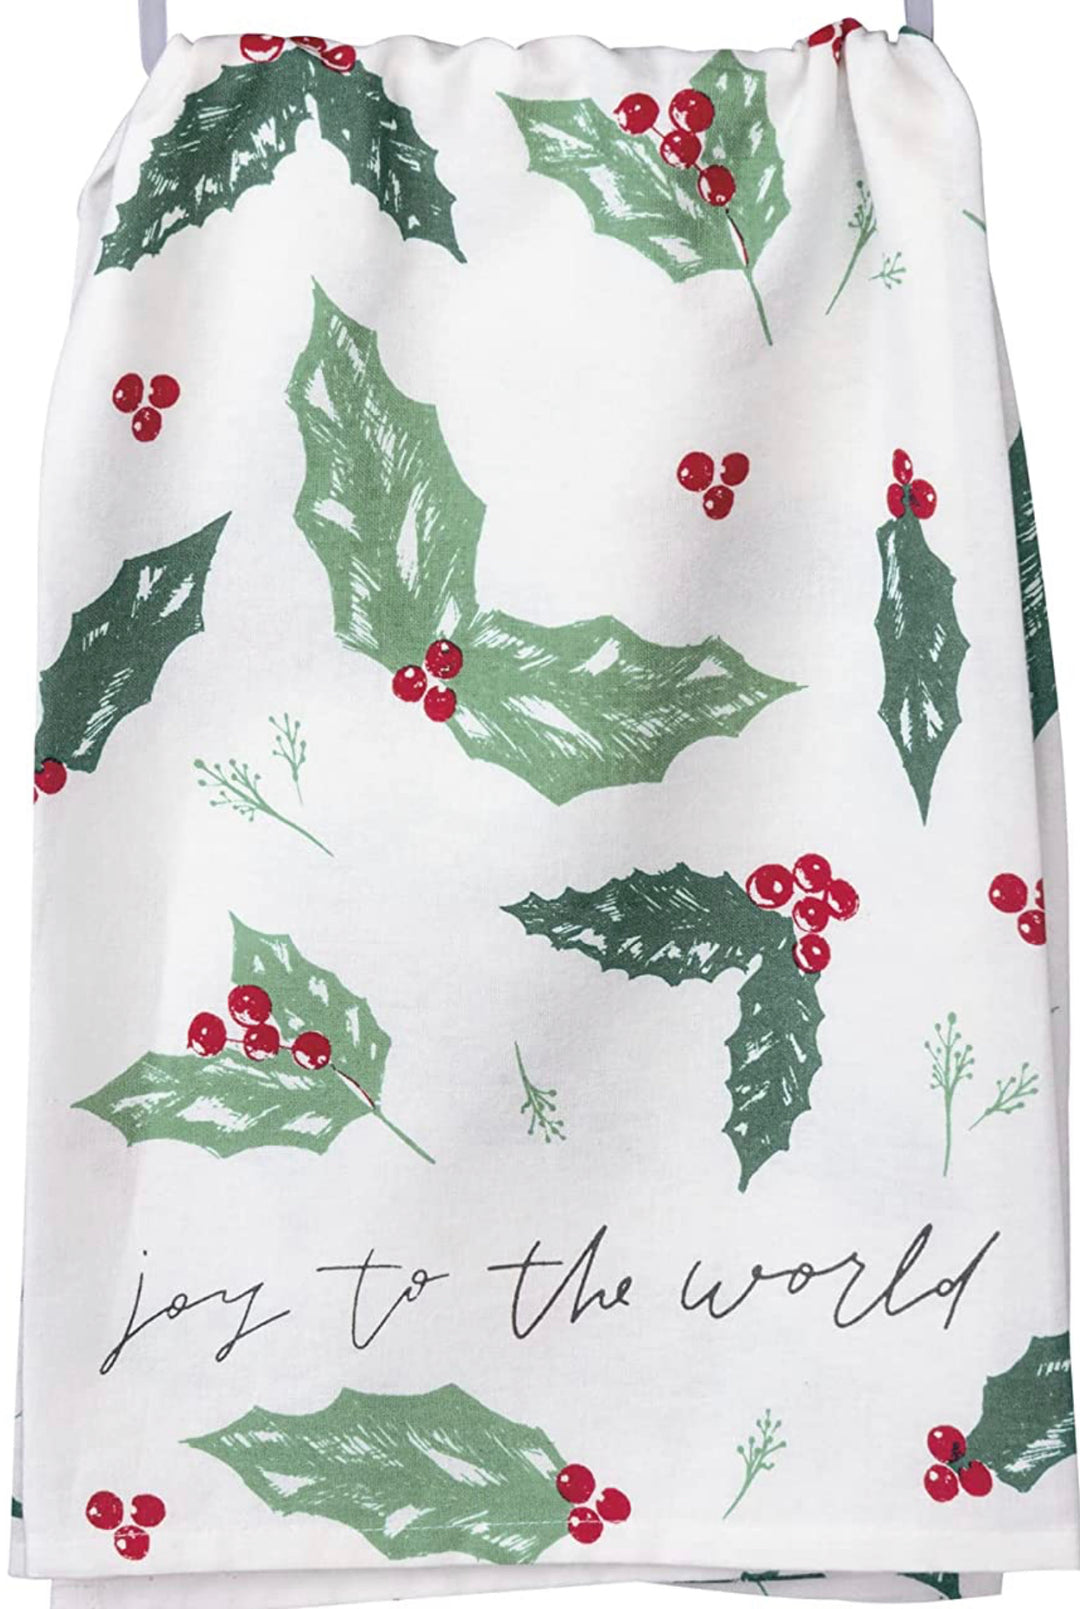 Joy to The World Dish Towel - The Teal Antler Boutique